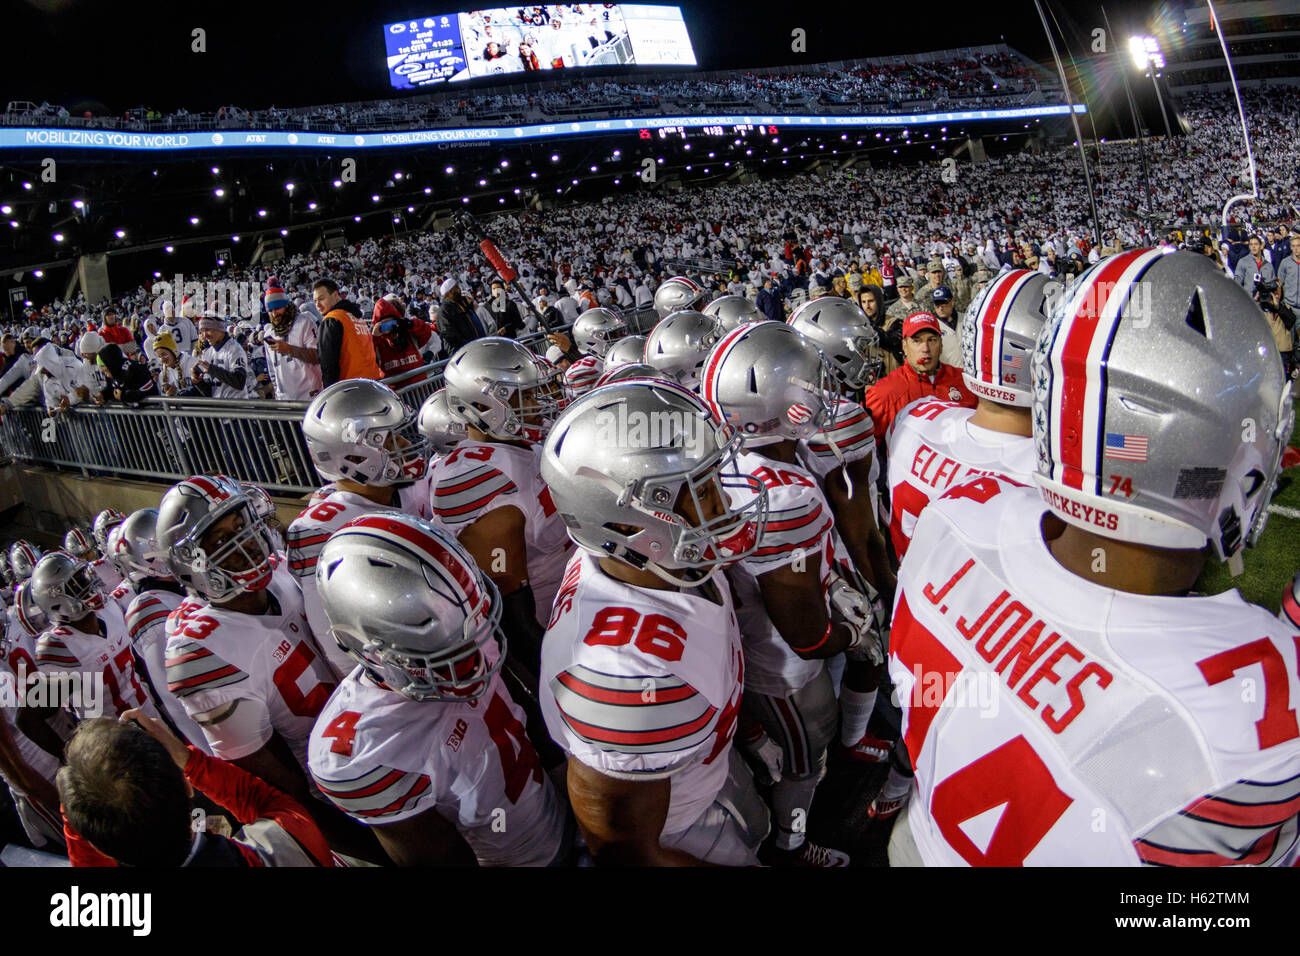 University Park, Pennsylvania, USA. 21st Oct, 2016. October 22nd, 2016: The Ohio State Buckeye team prepares to take the field during NCAA football game action between the Ohio State Buckeyes and the Penn State Nittany Lions at Beaver Stadium, University Park, PA. Photo by Adam Lacy/Zuma Wire © Adam Lacy/ZUMA Wire/Alamy Live News Stock Photo